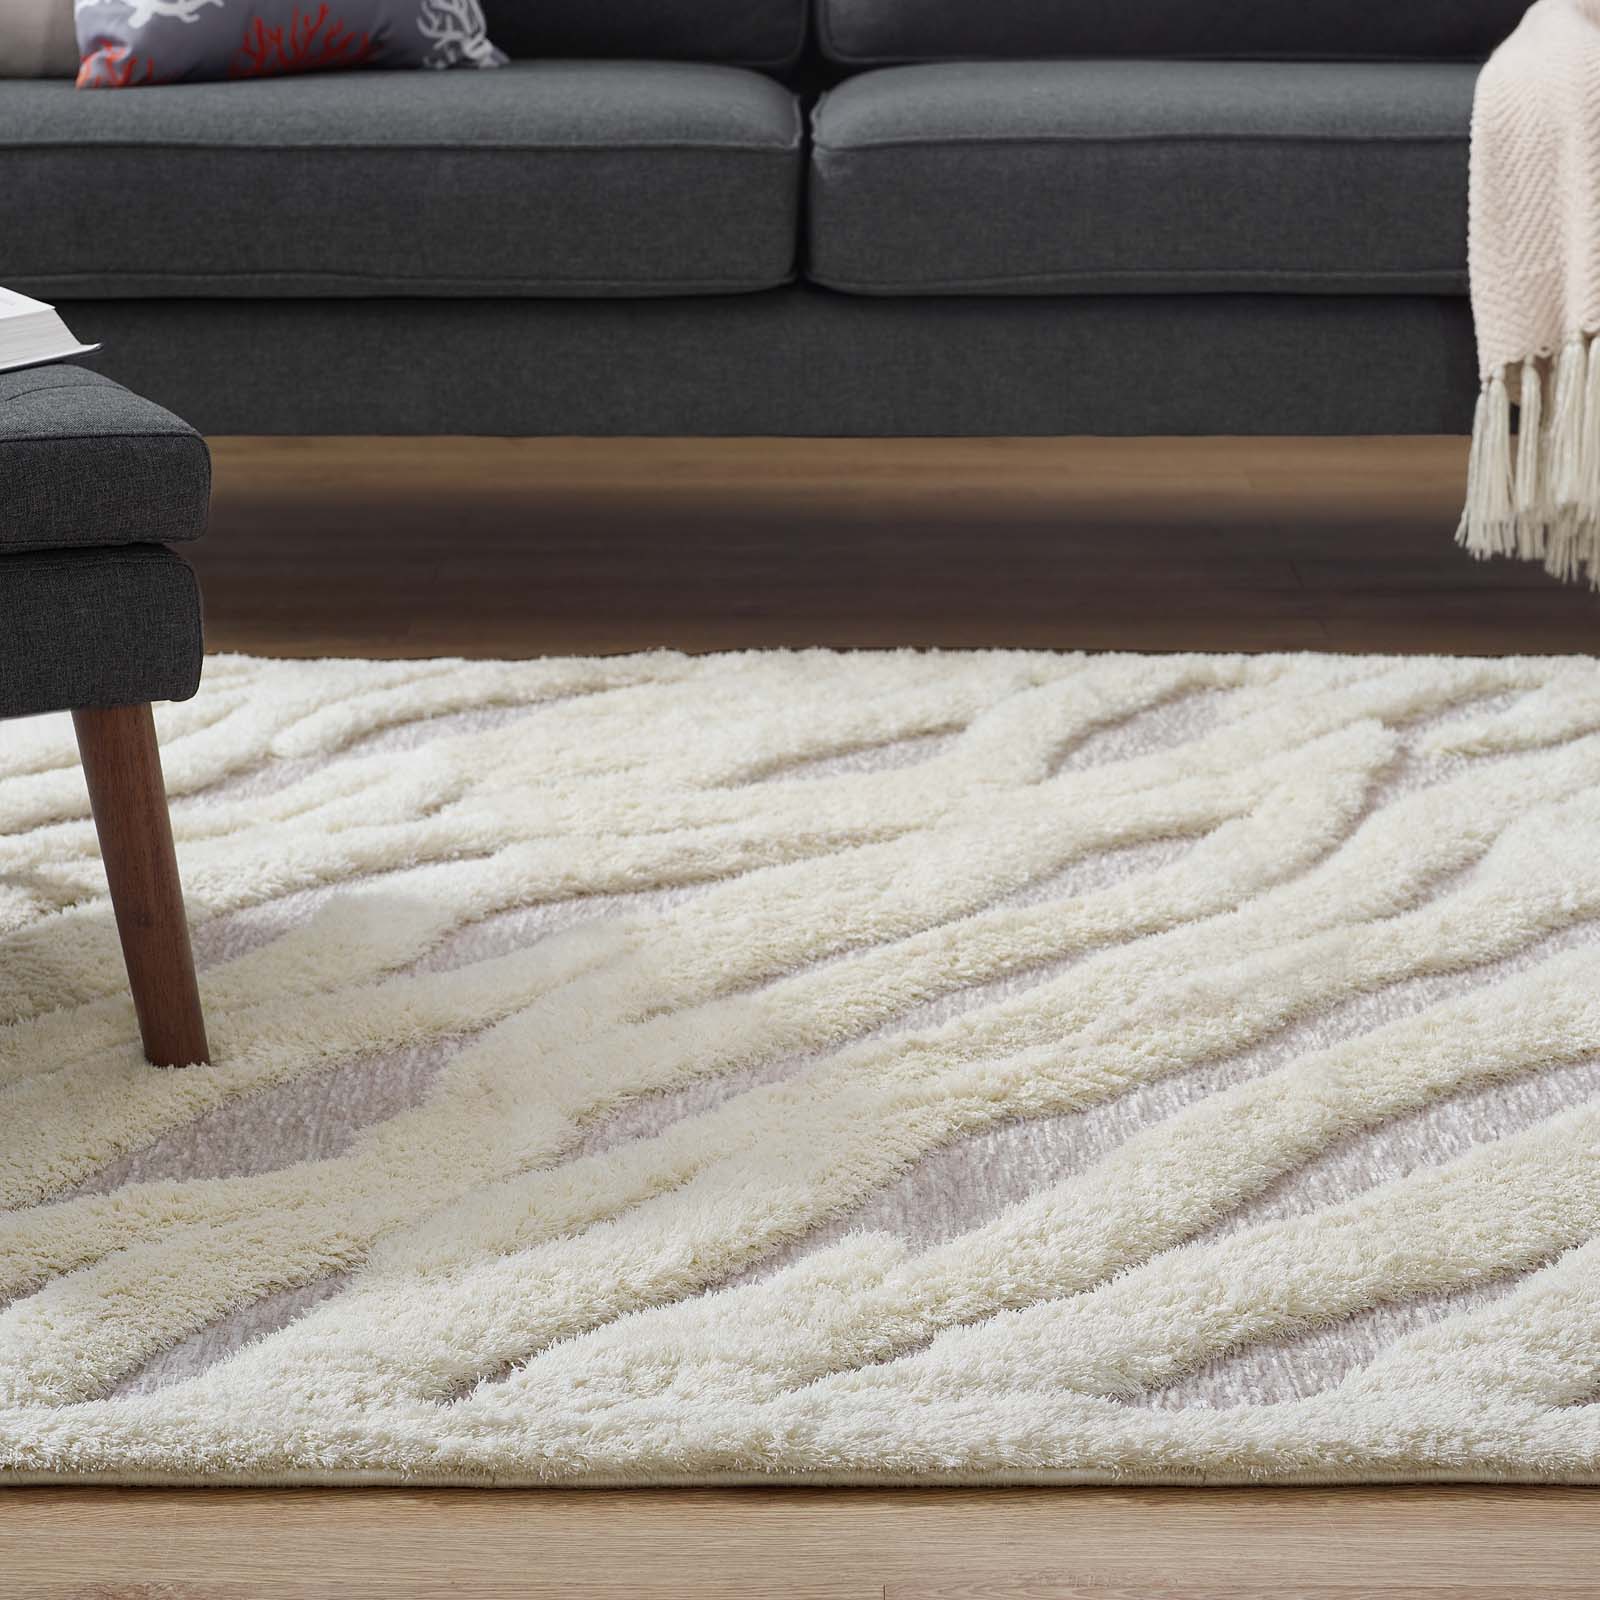 Modway Indoor Rugs - Whimsical Wavy Striped 5' x 8' Shag Area Rug Ivory & Light Gray